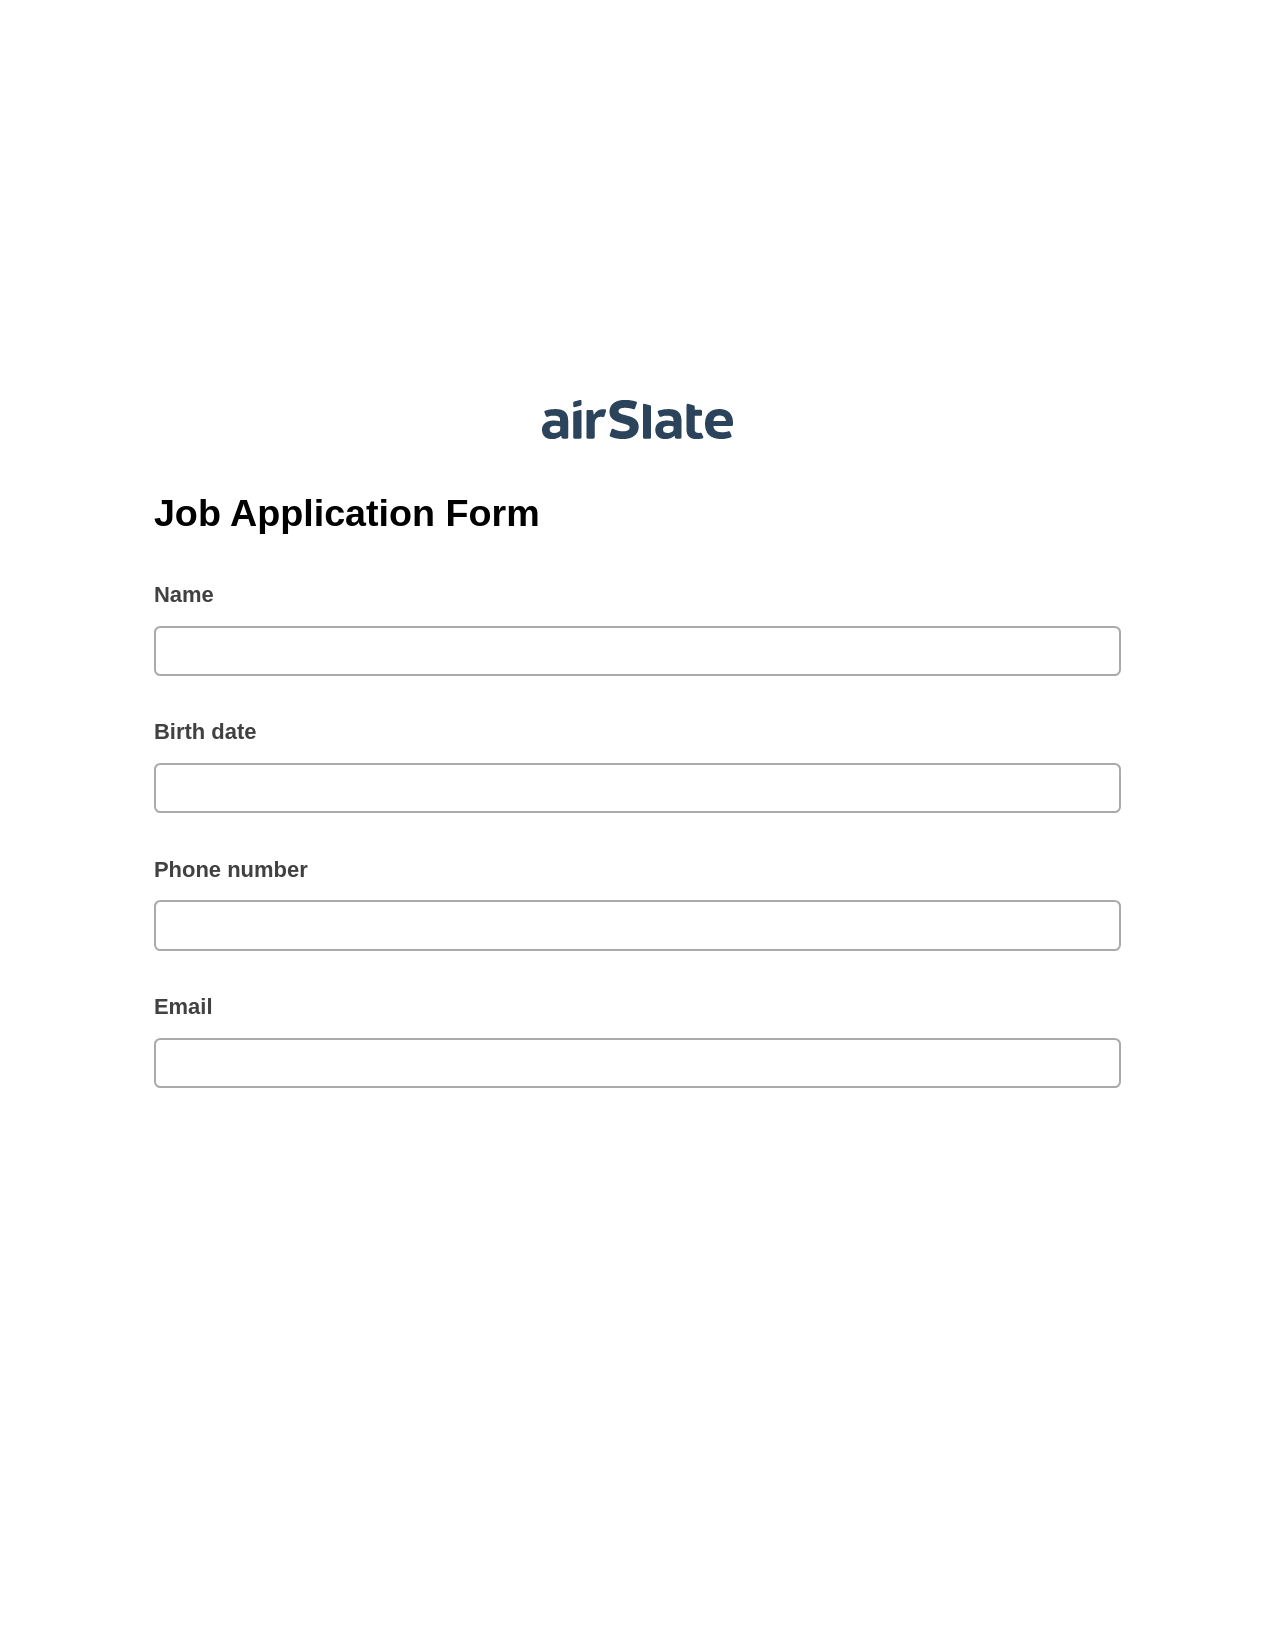 Multirole Job Application Form Pre-fill Dropdown from Airtable, Create slate bot, Google Drive Bot